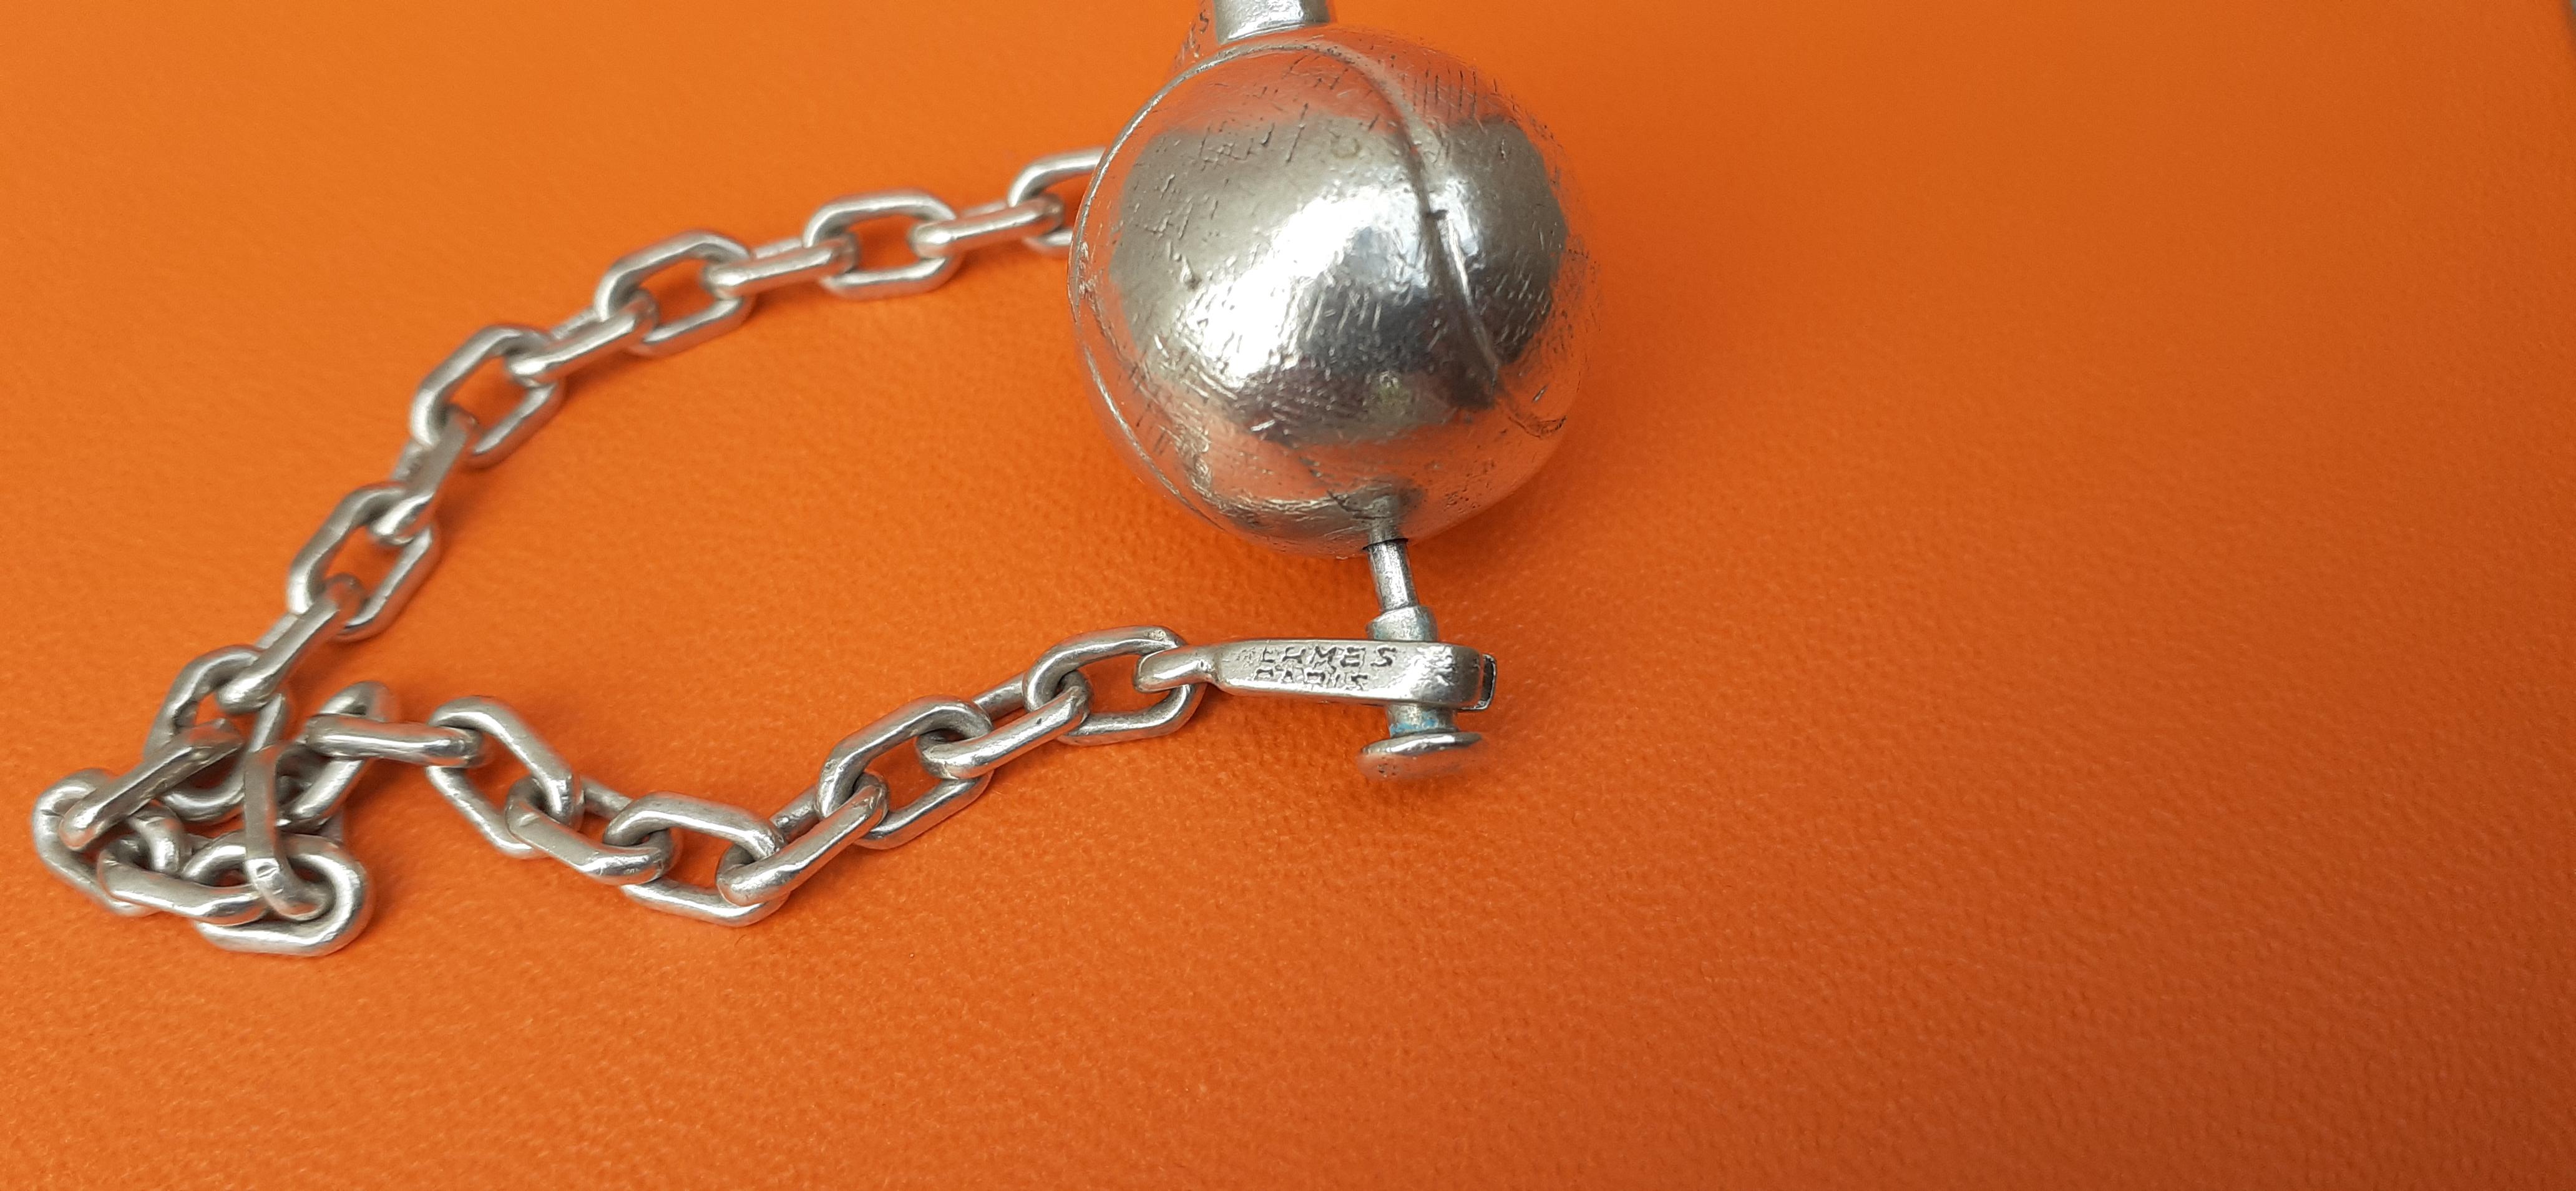 Exceptional Hermès Vintage Tennis Ball Key Ring Keychain in Silver Rare For Sale 5